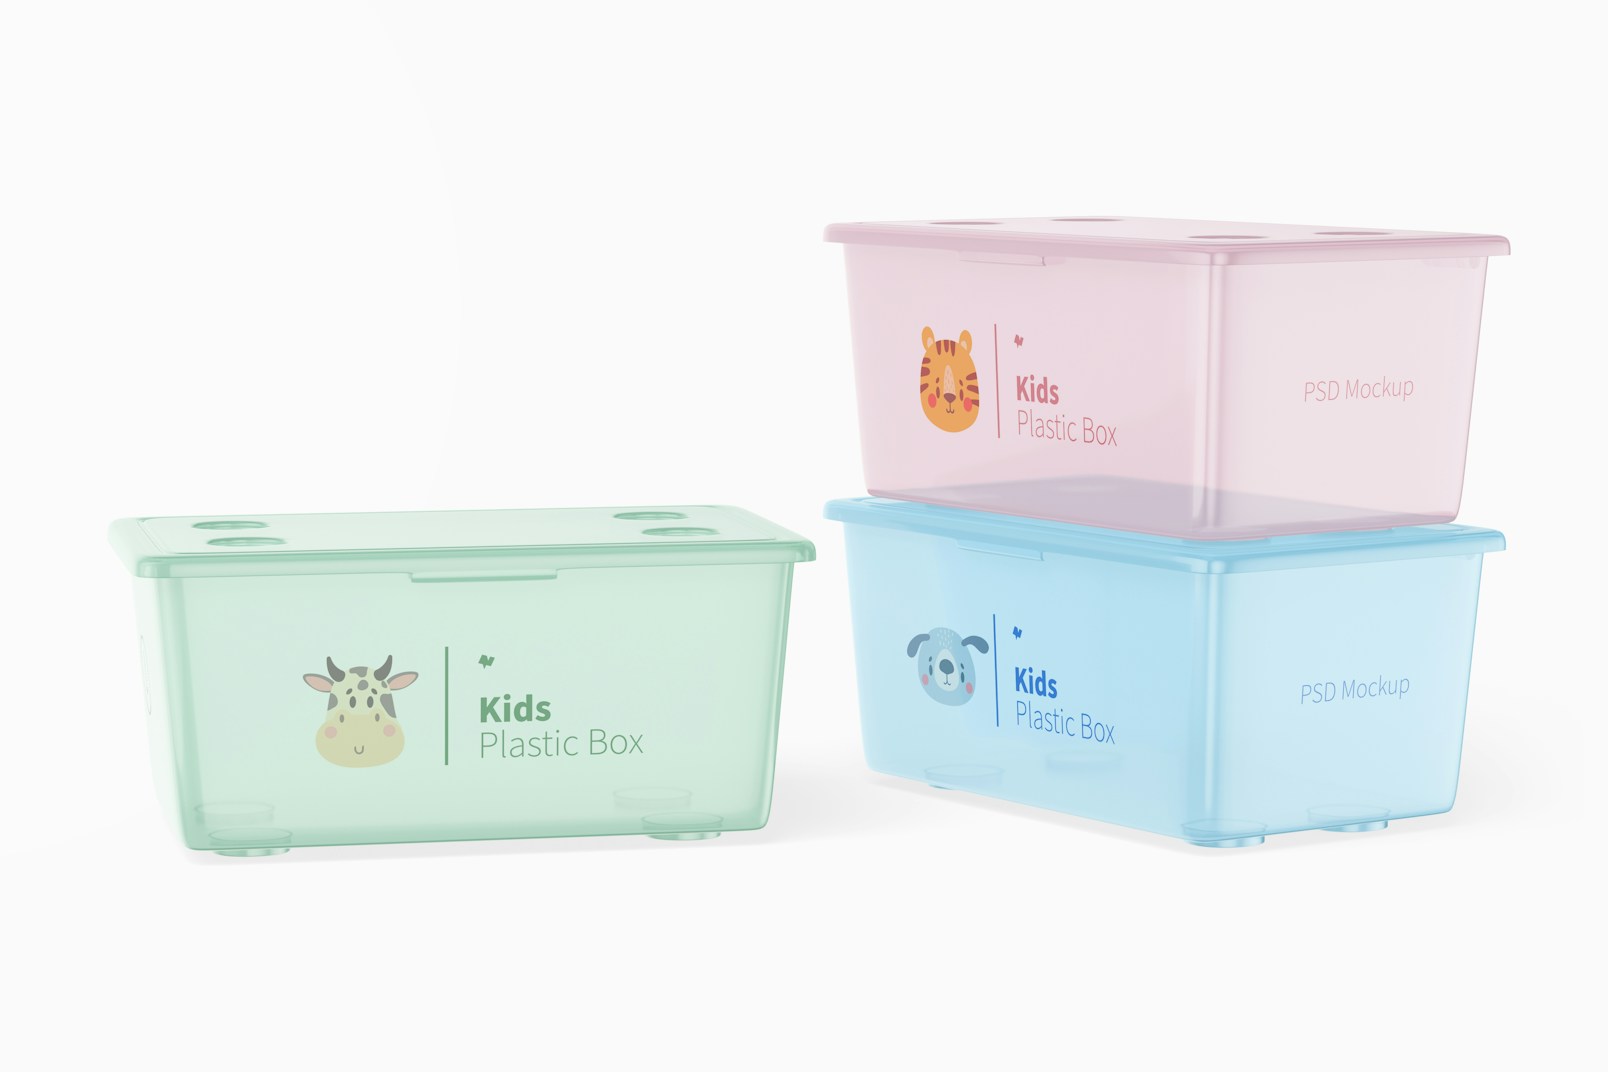 Kids Small Plastic Boxes with Lid Mockup